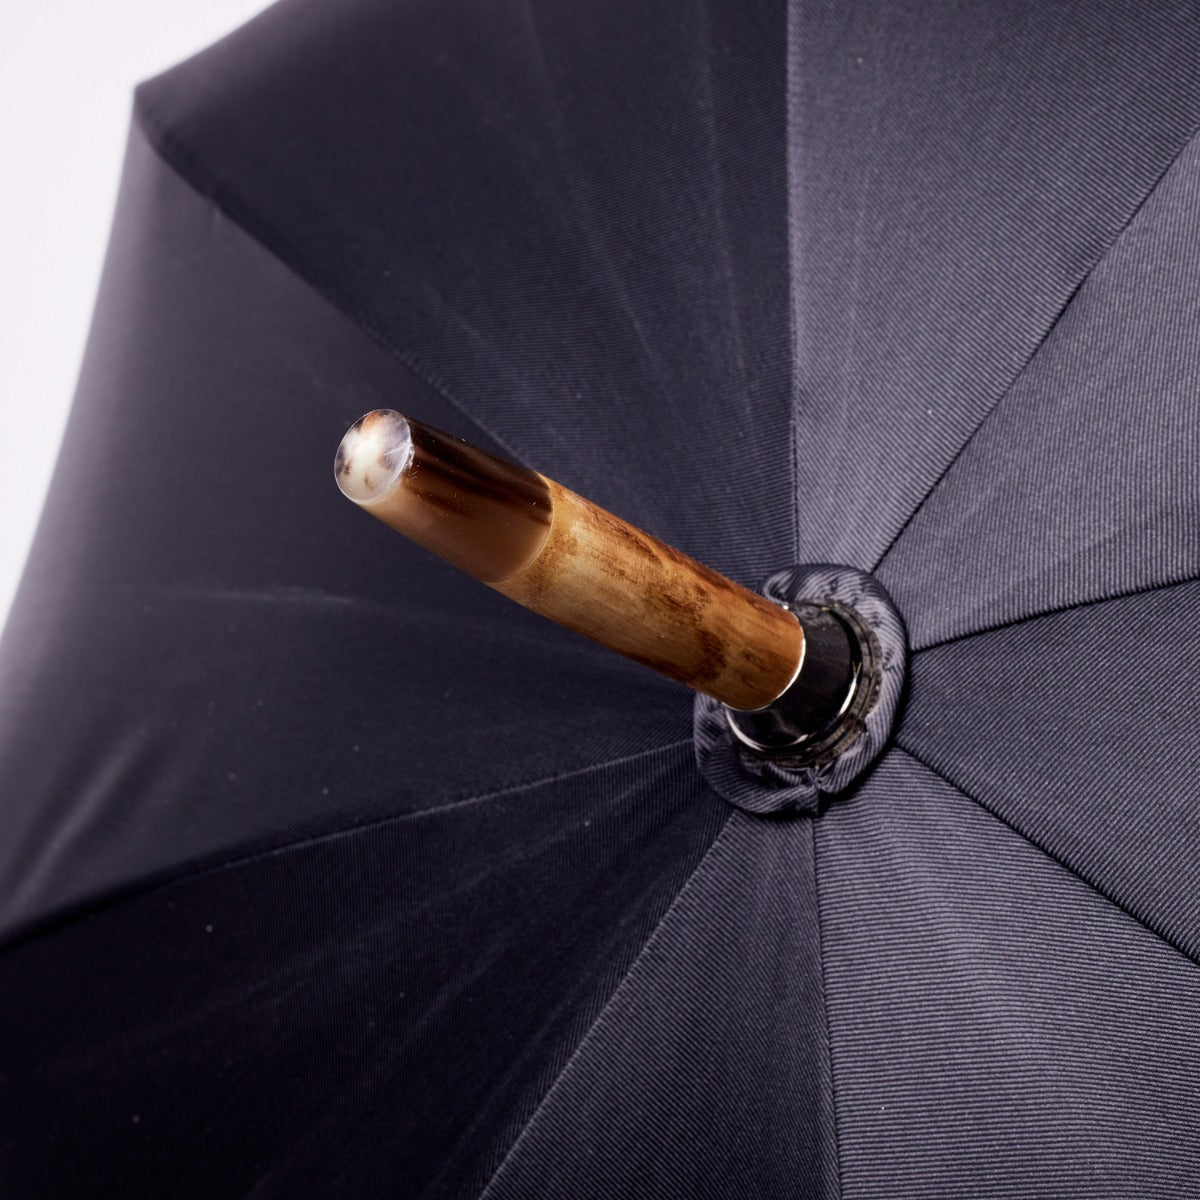 A Palundio umbrella with a wooden handle from KirbyAllison.com.